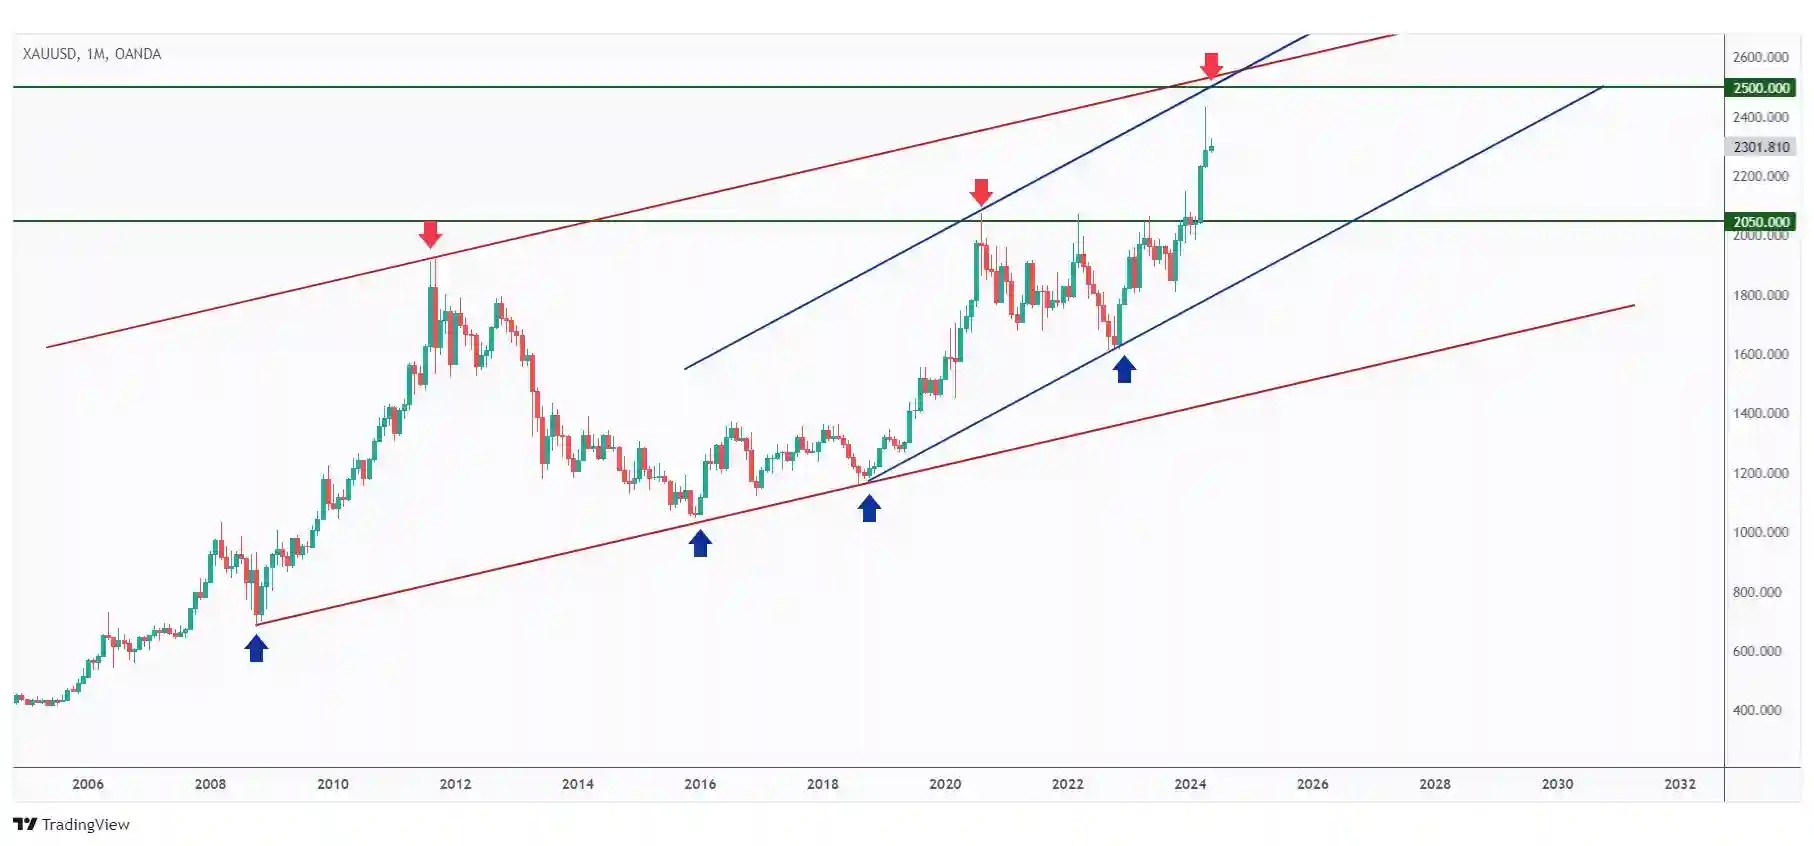 Gold monthly chart rejecting the upper bound of two channels long-term and short-term and a strong round number $2500.